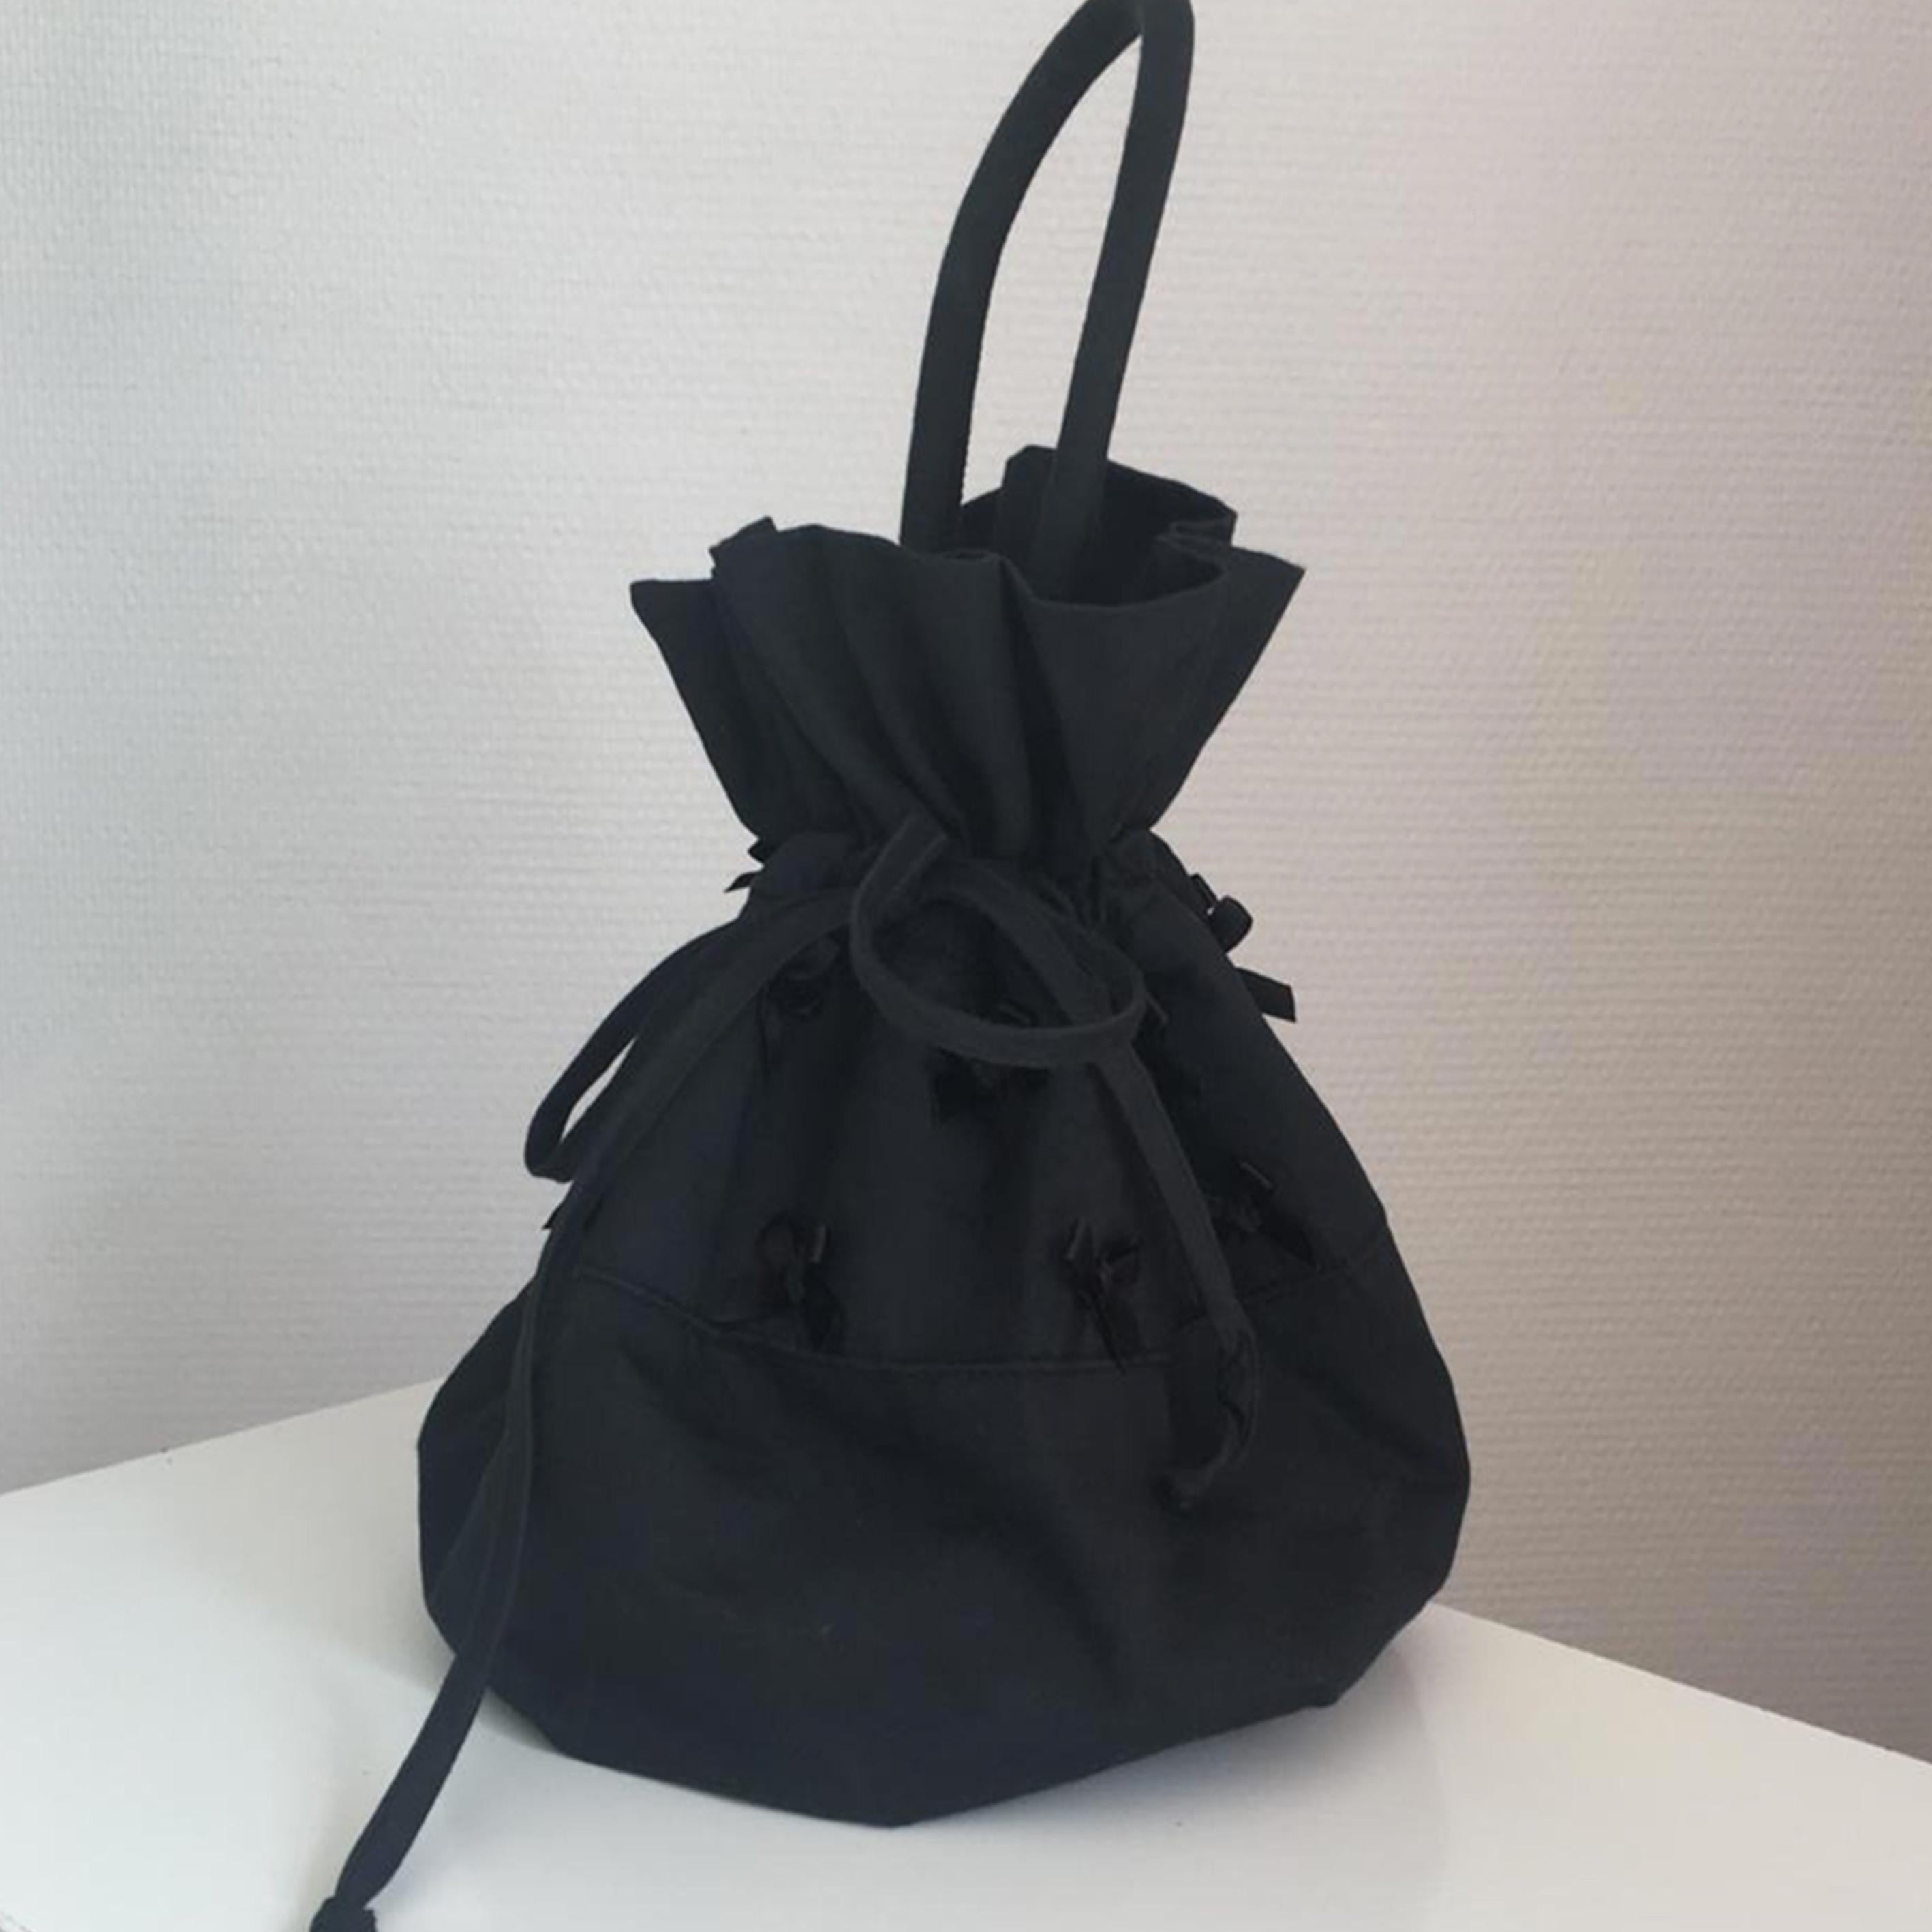 CHANTAL THOMASS 90s Mini Cotton black bag with nodes

Tag: Thomass

Length with handle: 14,17 inches/ 36cm

Length without handle: 9,44inches/ 24cm

Width: 9,05 inches/ 23cmMaterial

100% cotton

Perfect condition

Shipping worldwide with tracking